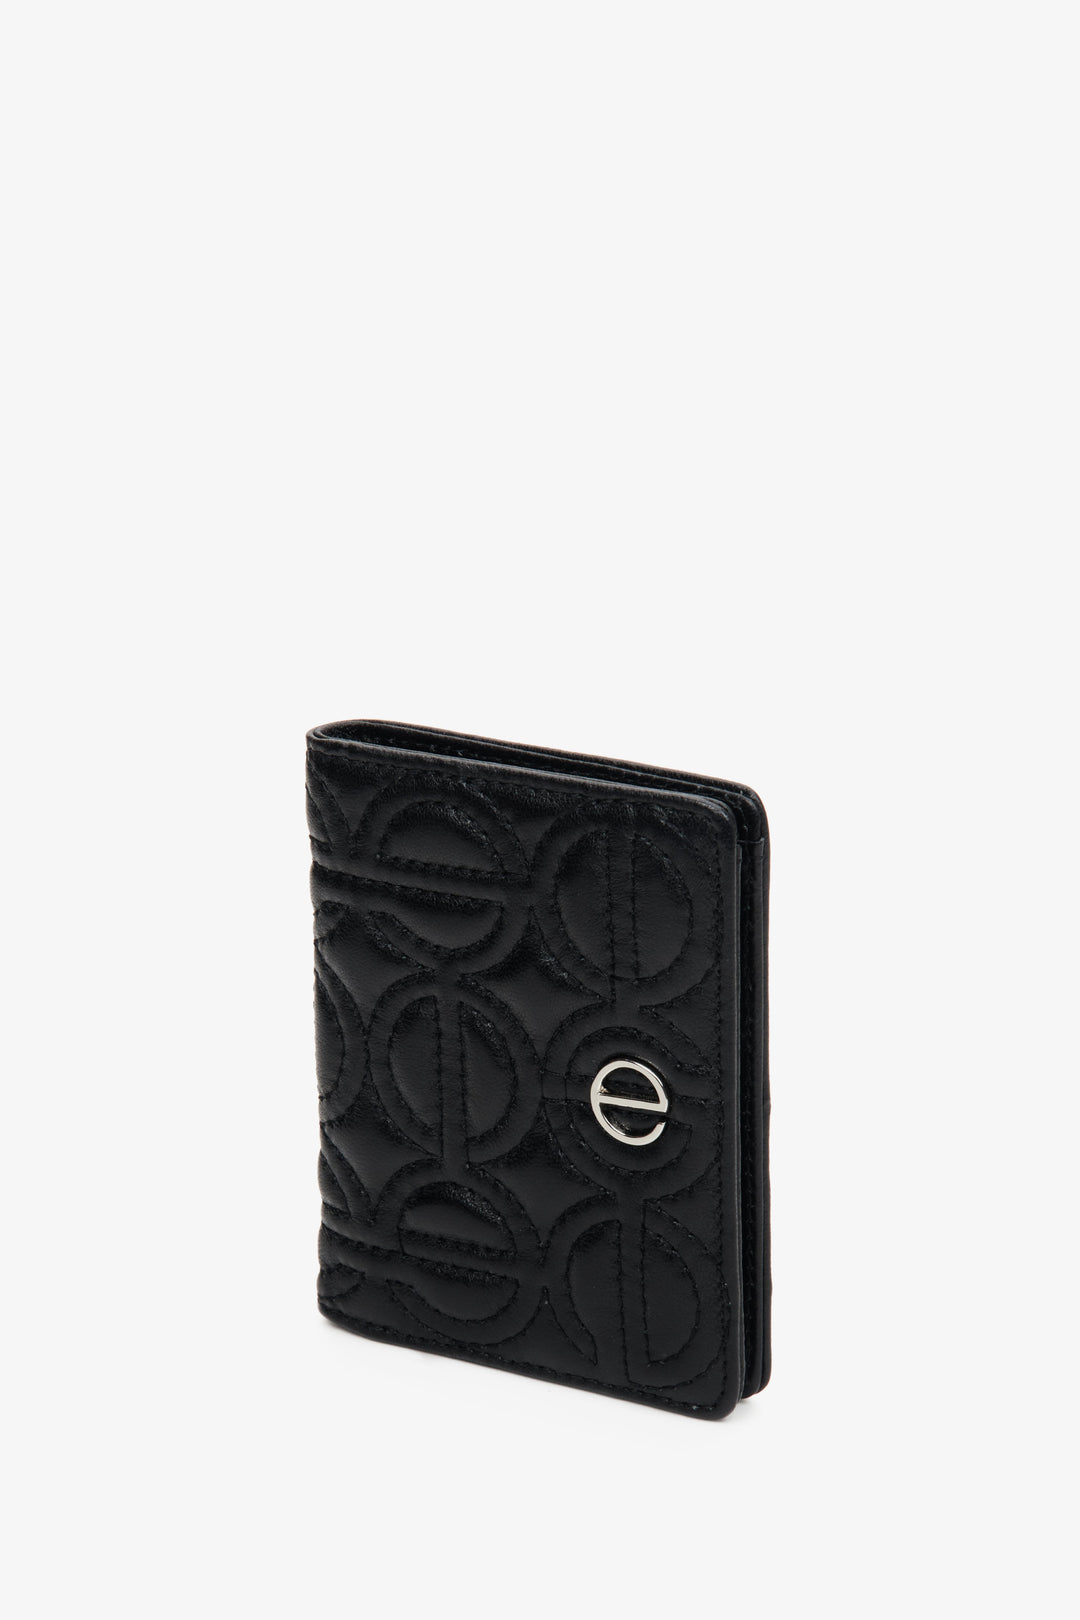 Small women's black card leather wallet with silver accents by Estro.